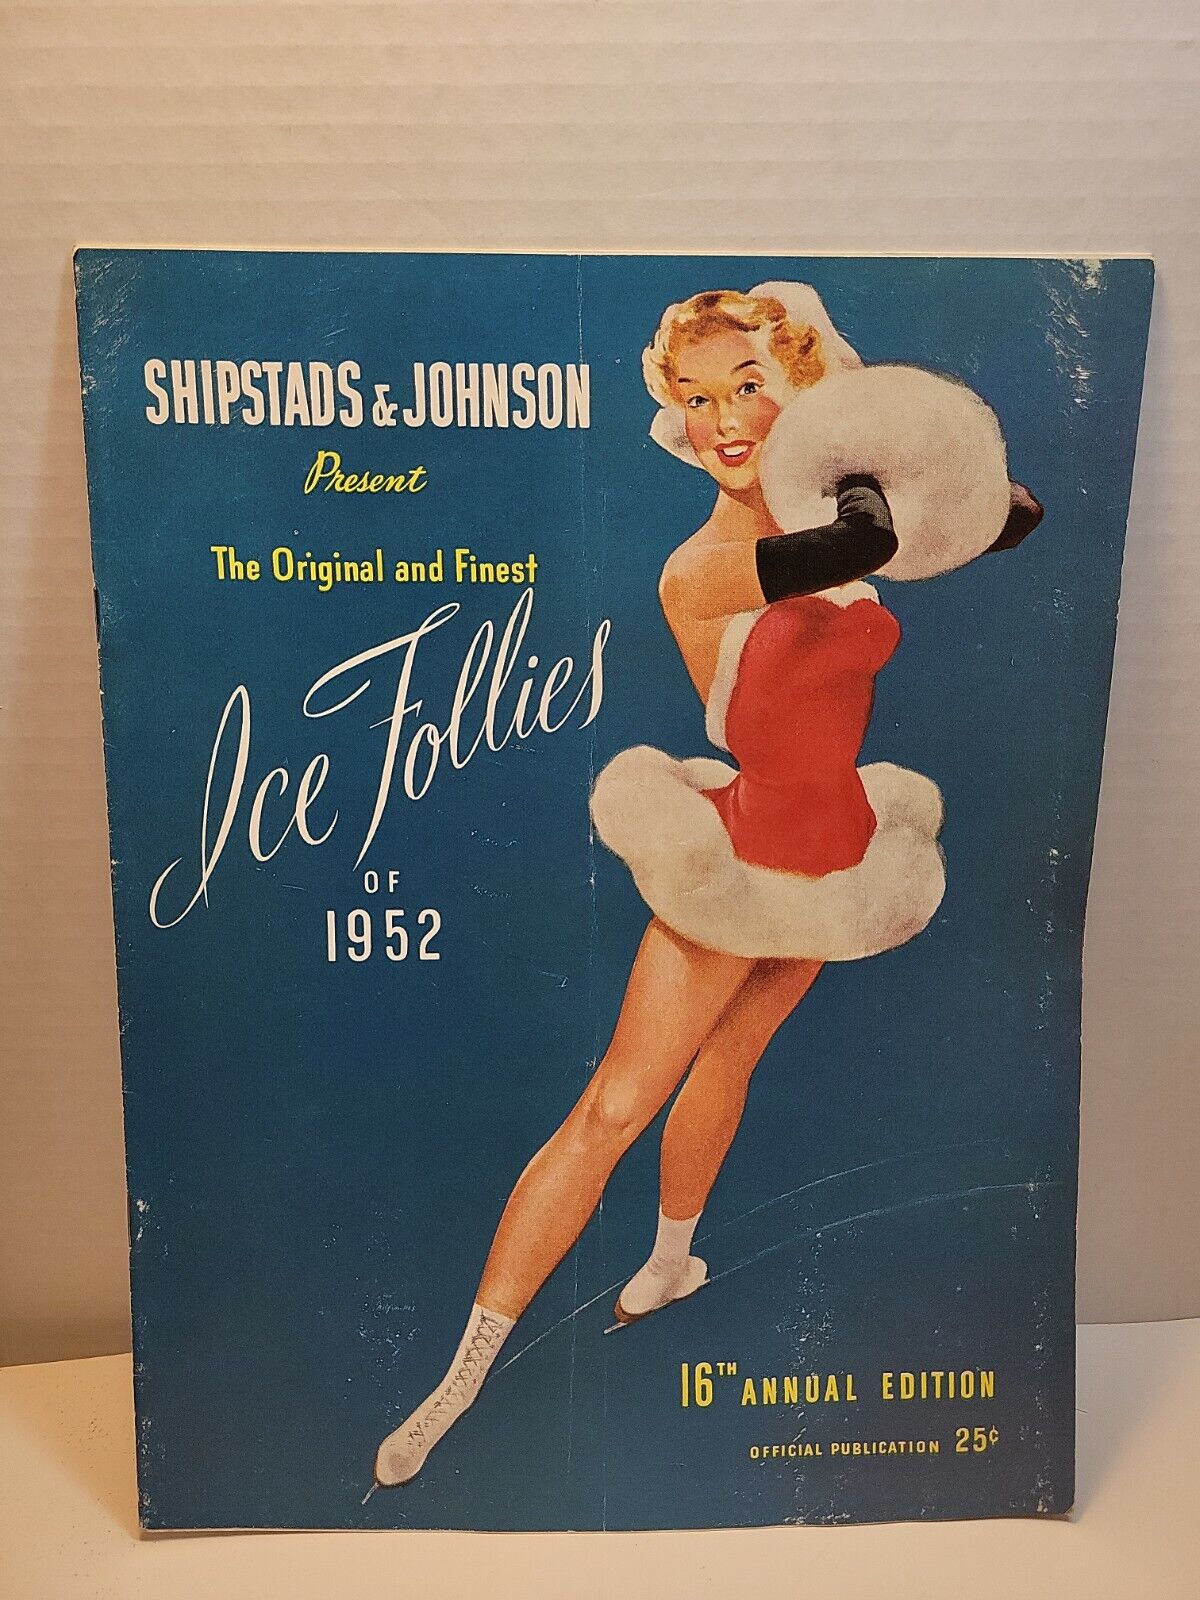 ICE FOLLIES of 1952 -  OFFICIAL PUBLICATION - The Shipstads & Johnson 16th  